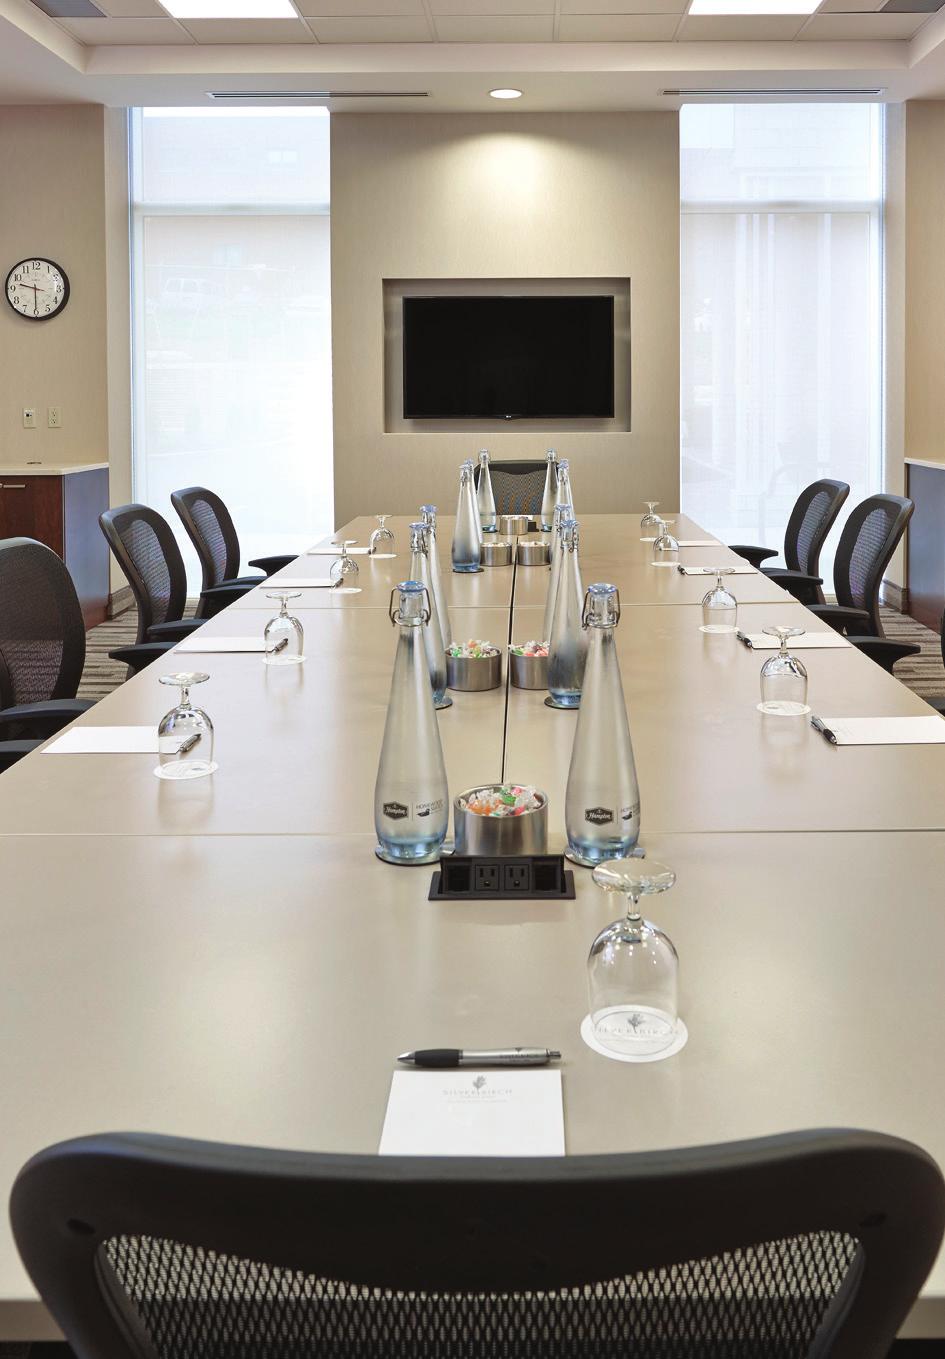 Centre Benefits It s time your next meeting got what it deserves. Everything! The Centre is the most inspiring meeting facility in Atlantic Canada, offering you the very best of everything.